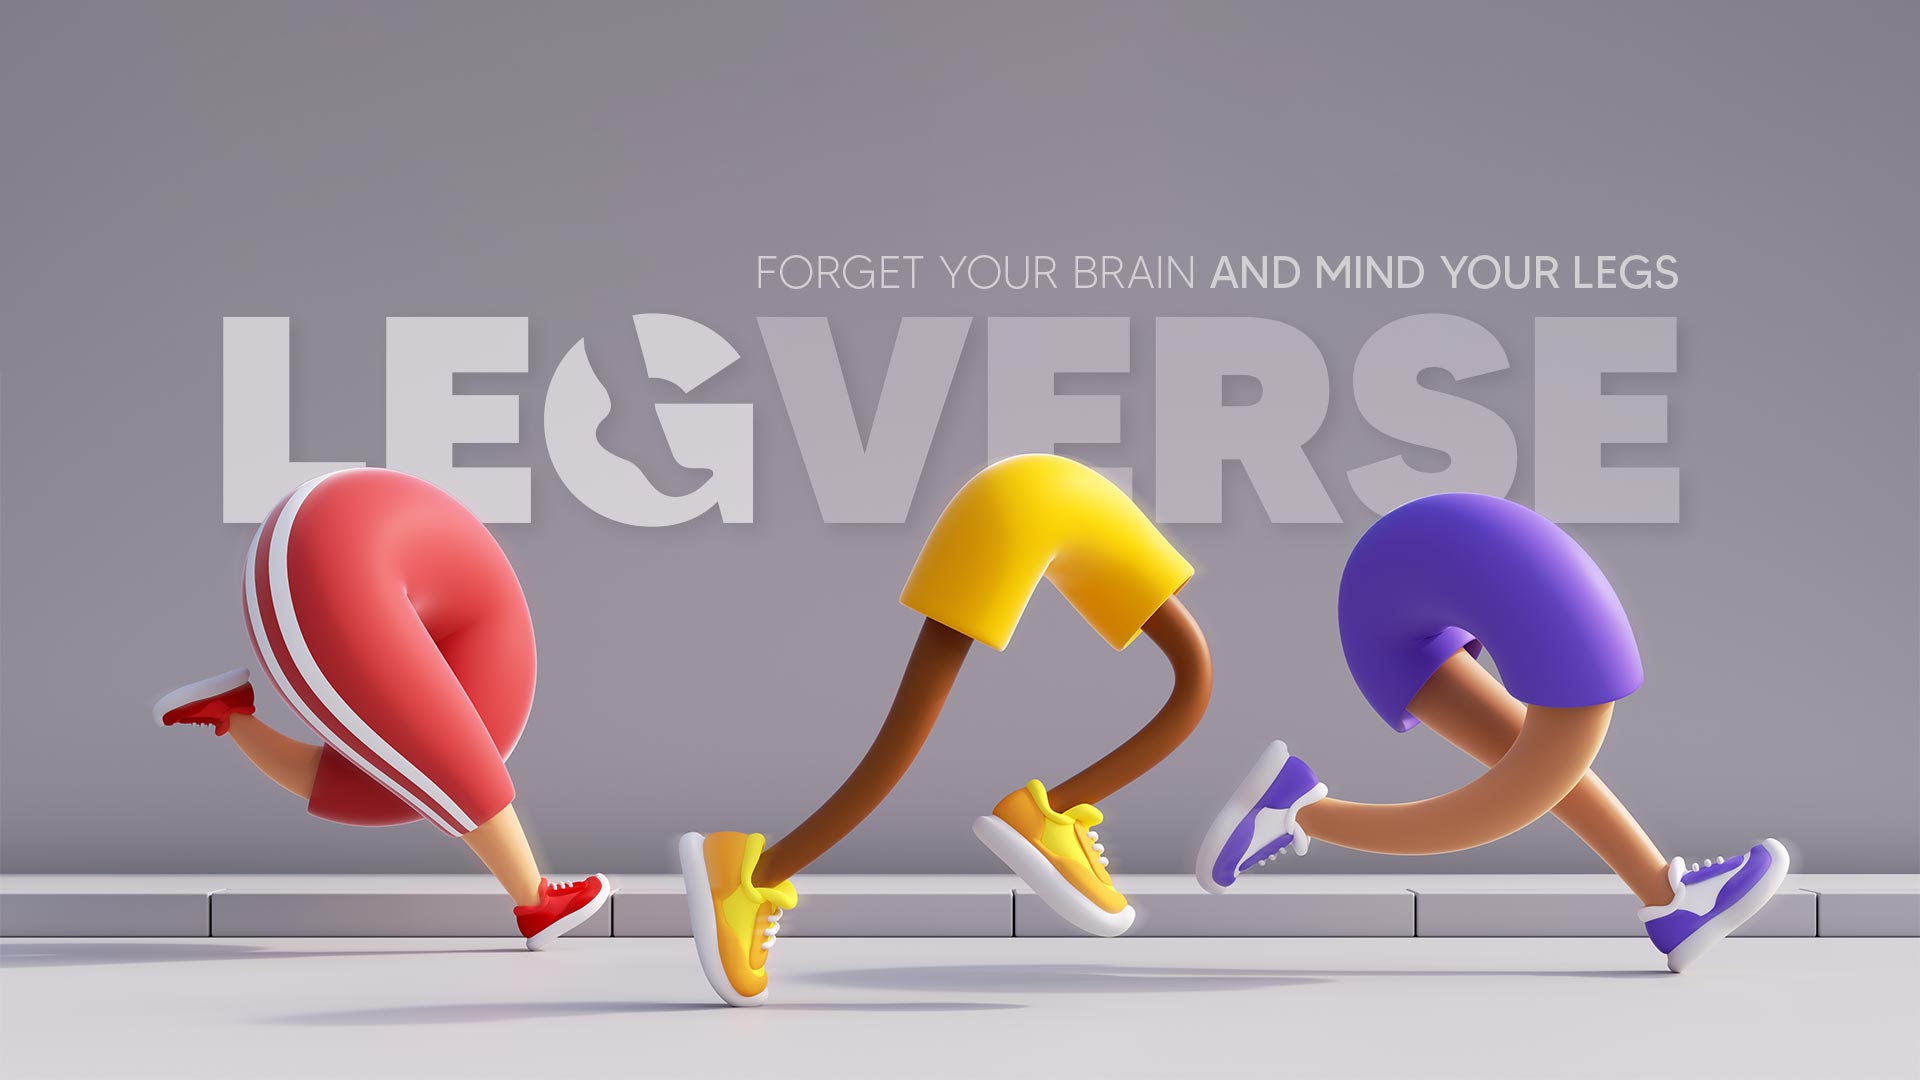 Introducing Legverse – The First Metaverse For Legs [APRIL FOOL’S]